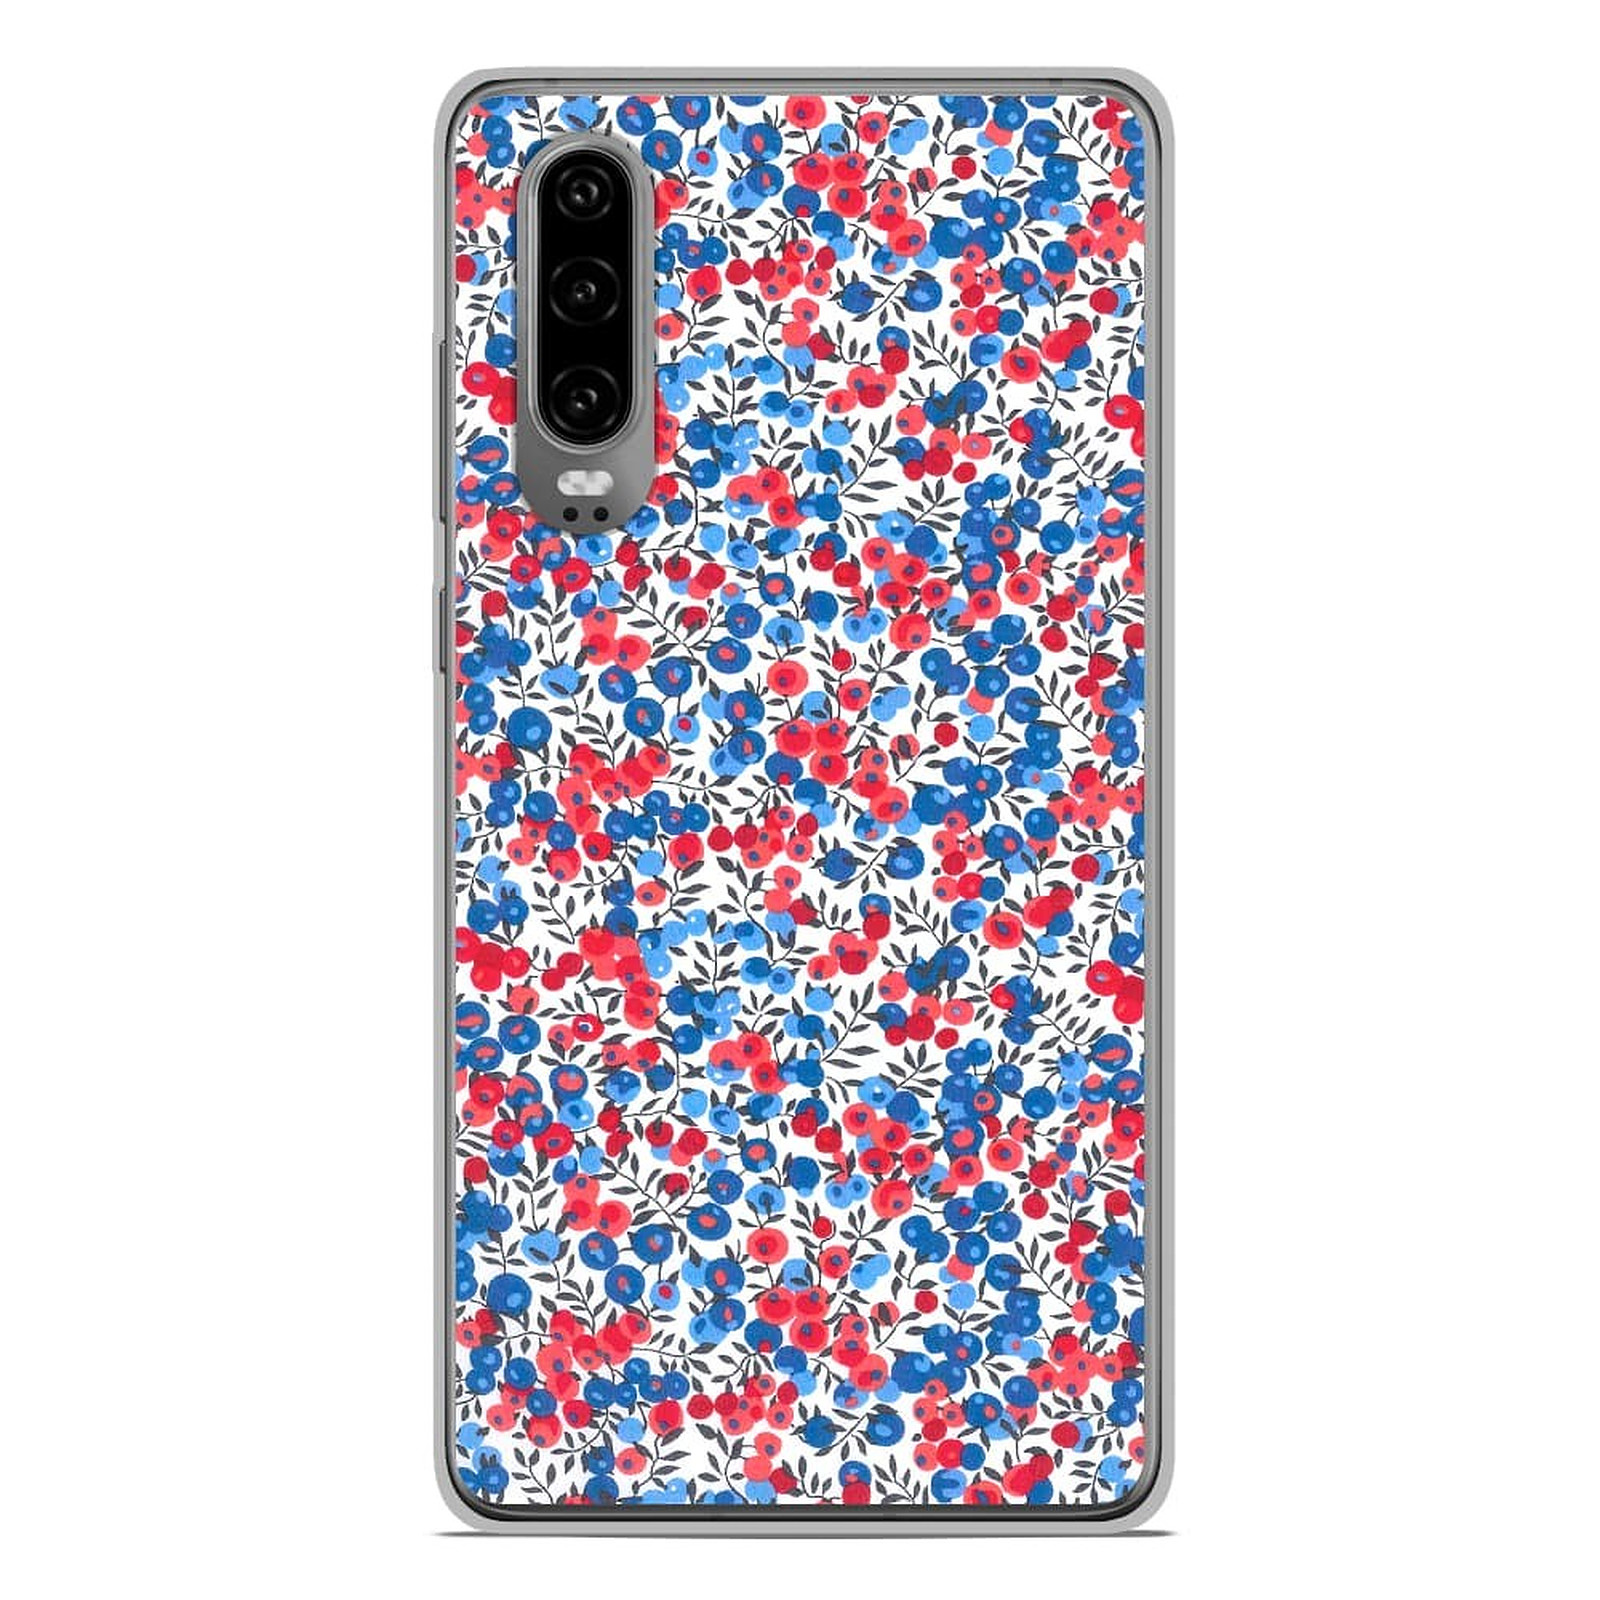 1001 Coques Coque silicone gel Huawei P30 motif Liberty Wiltshire Bleu - Coque telephone 1001Coques